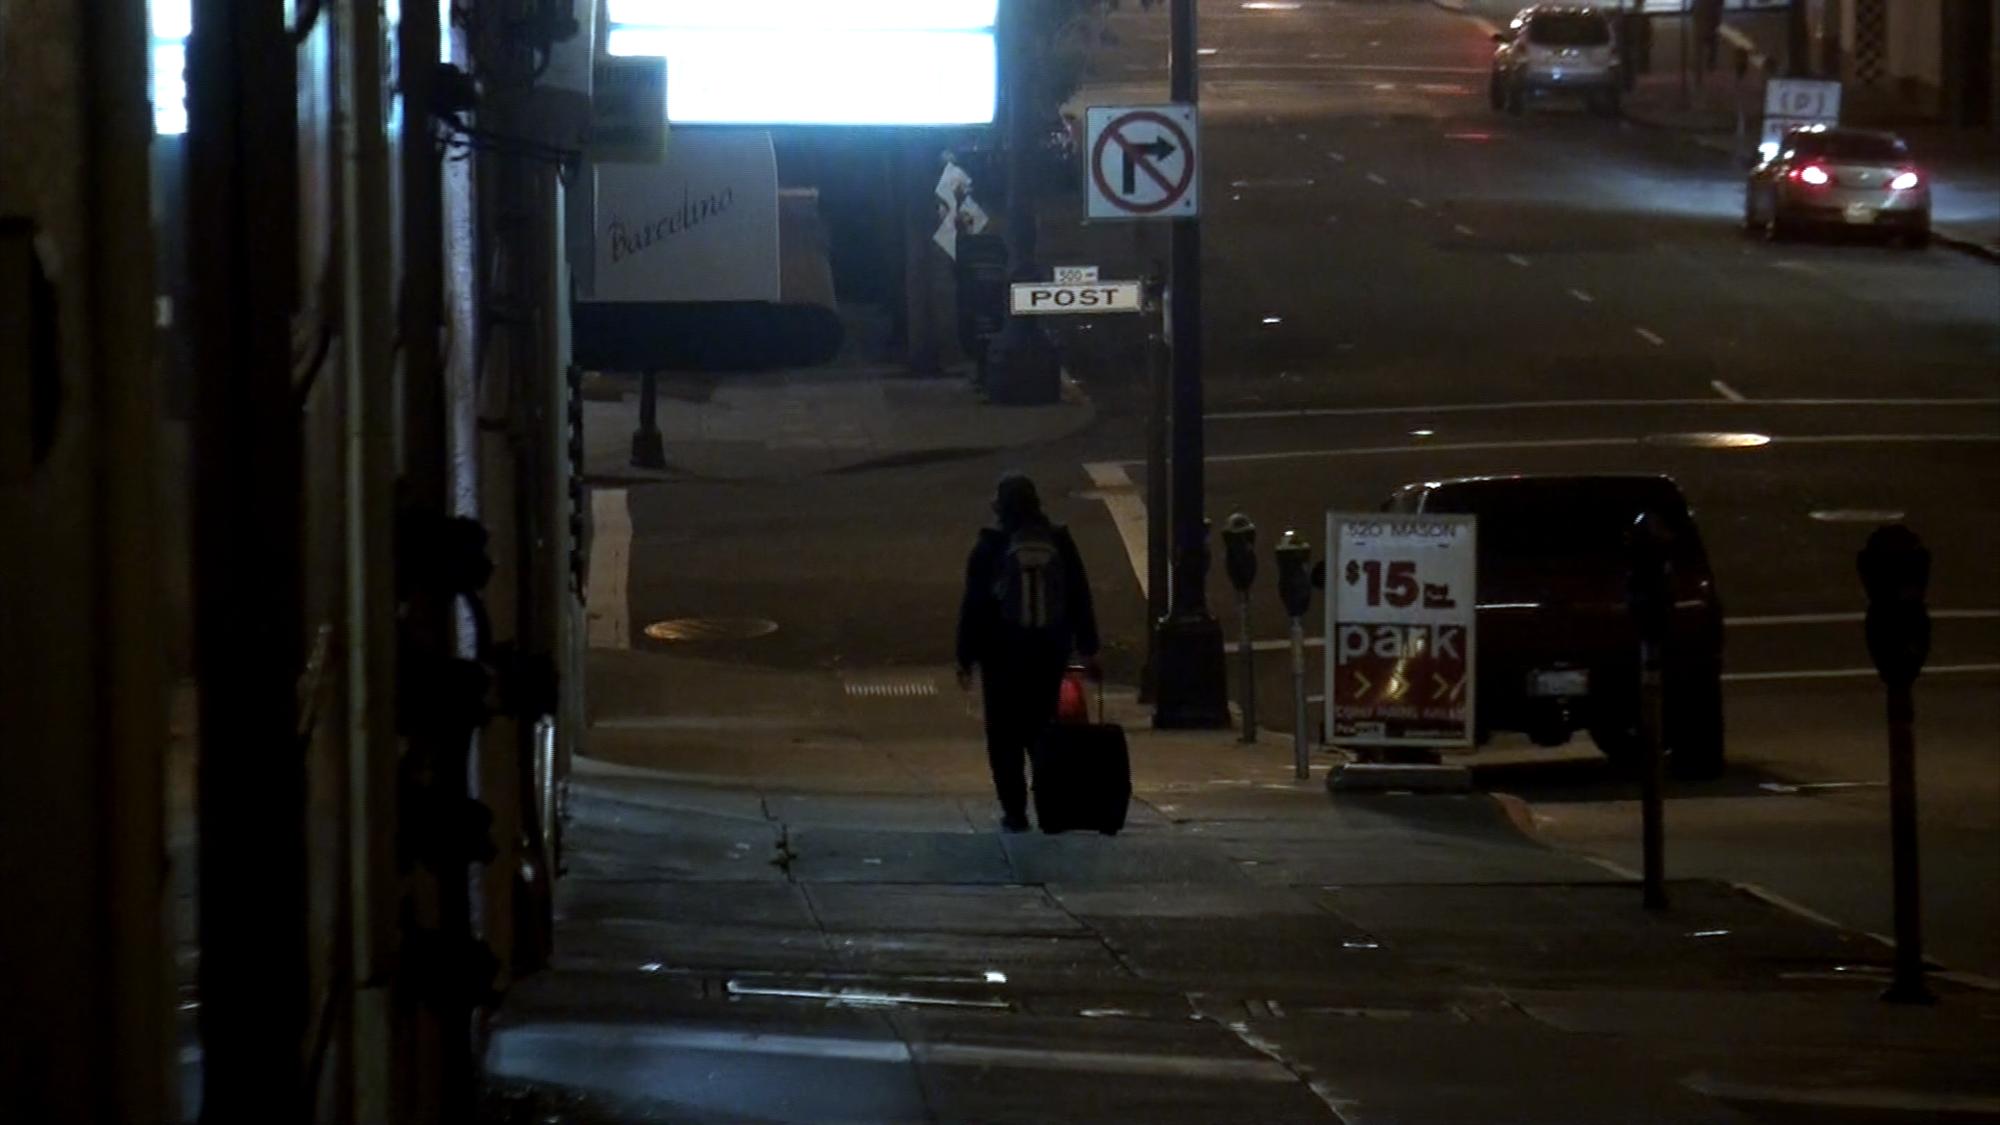 a person walking down the side walk next to traffic